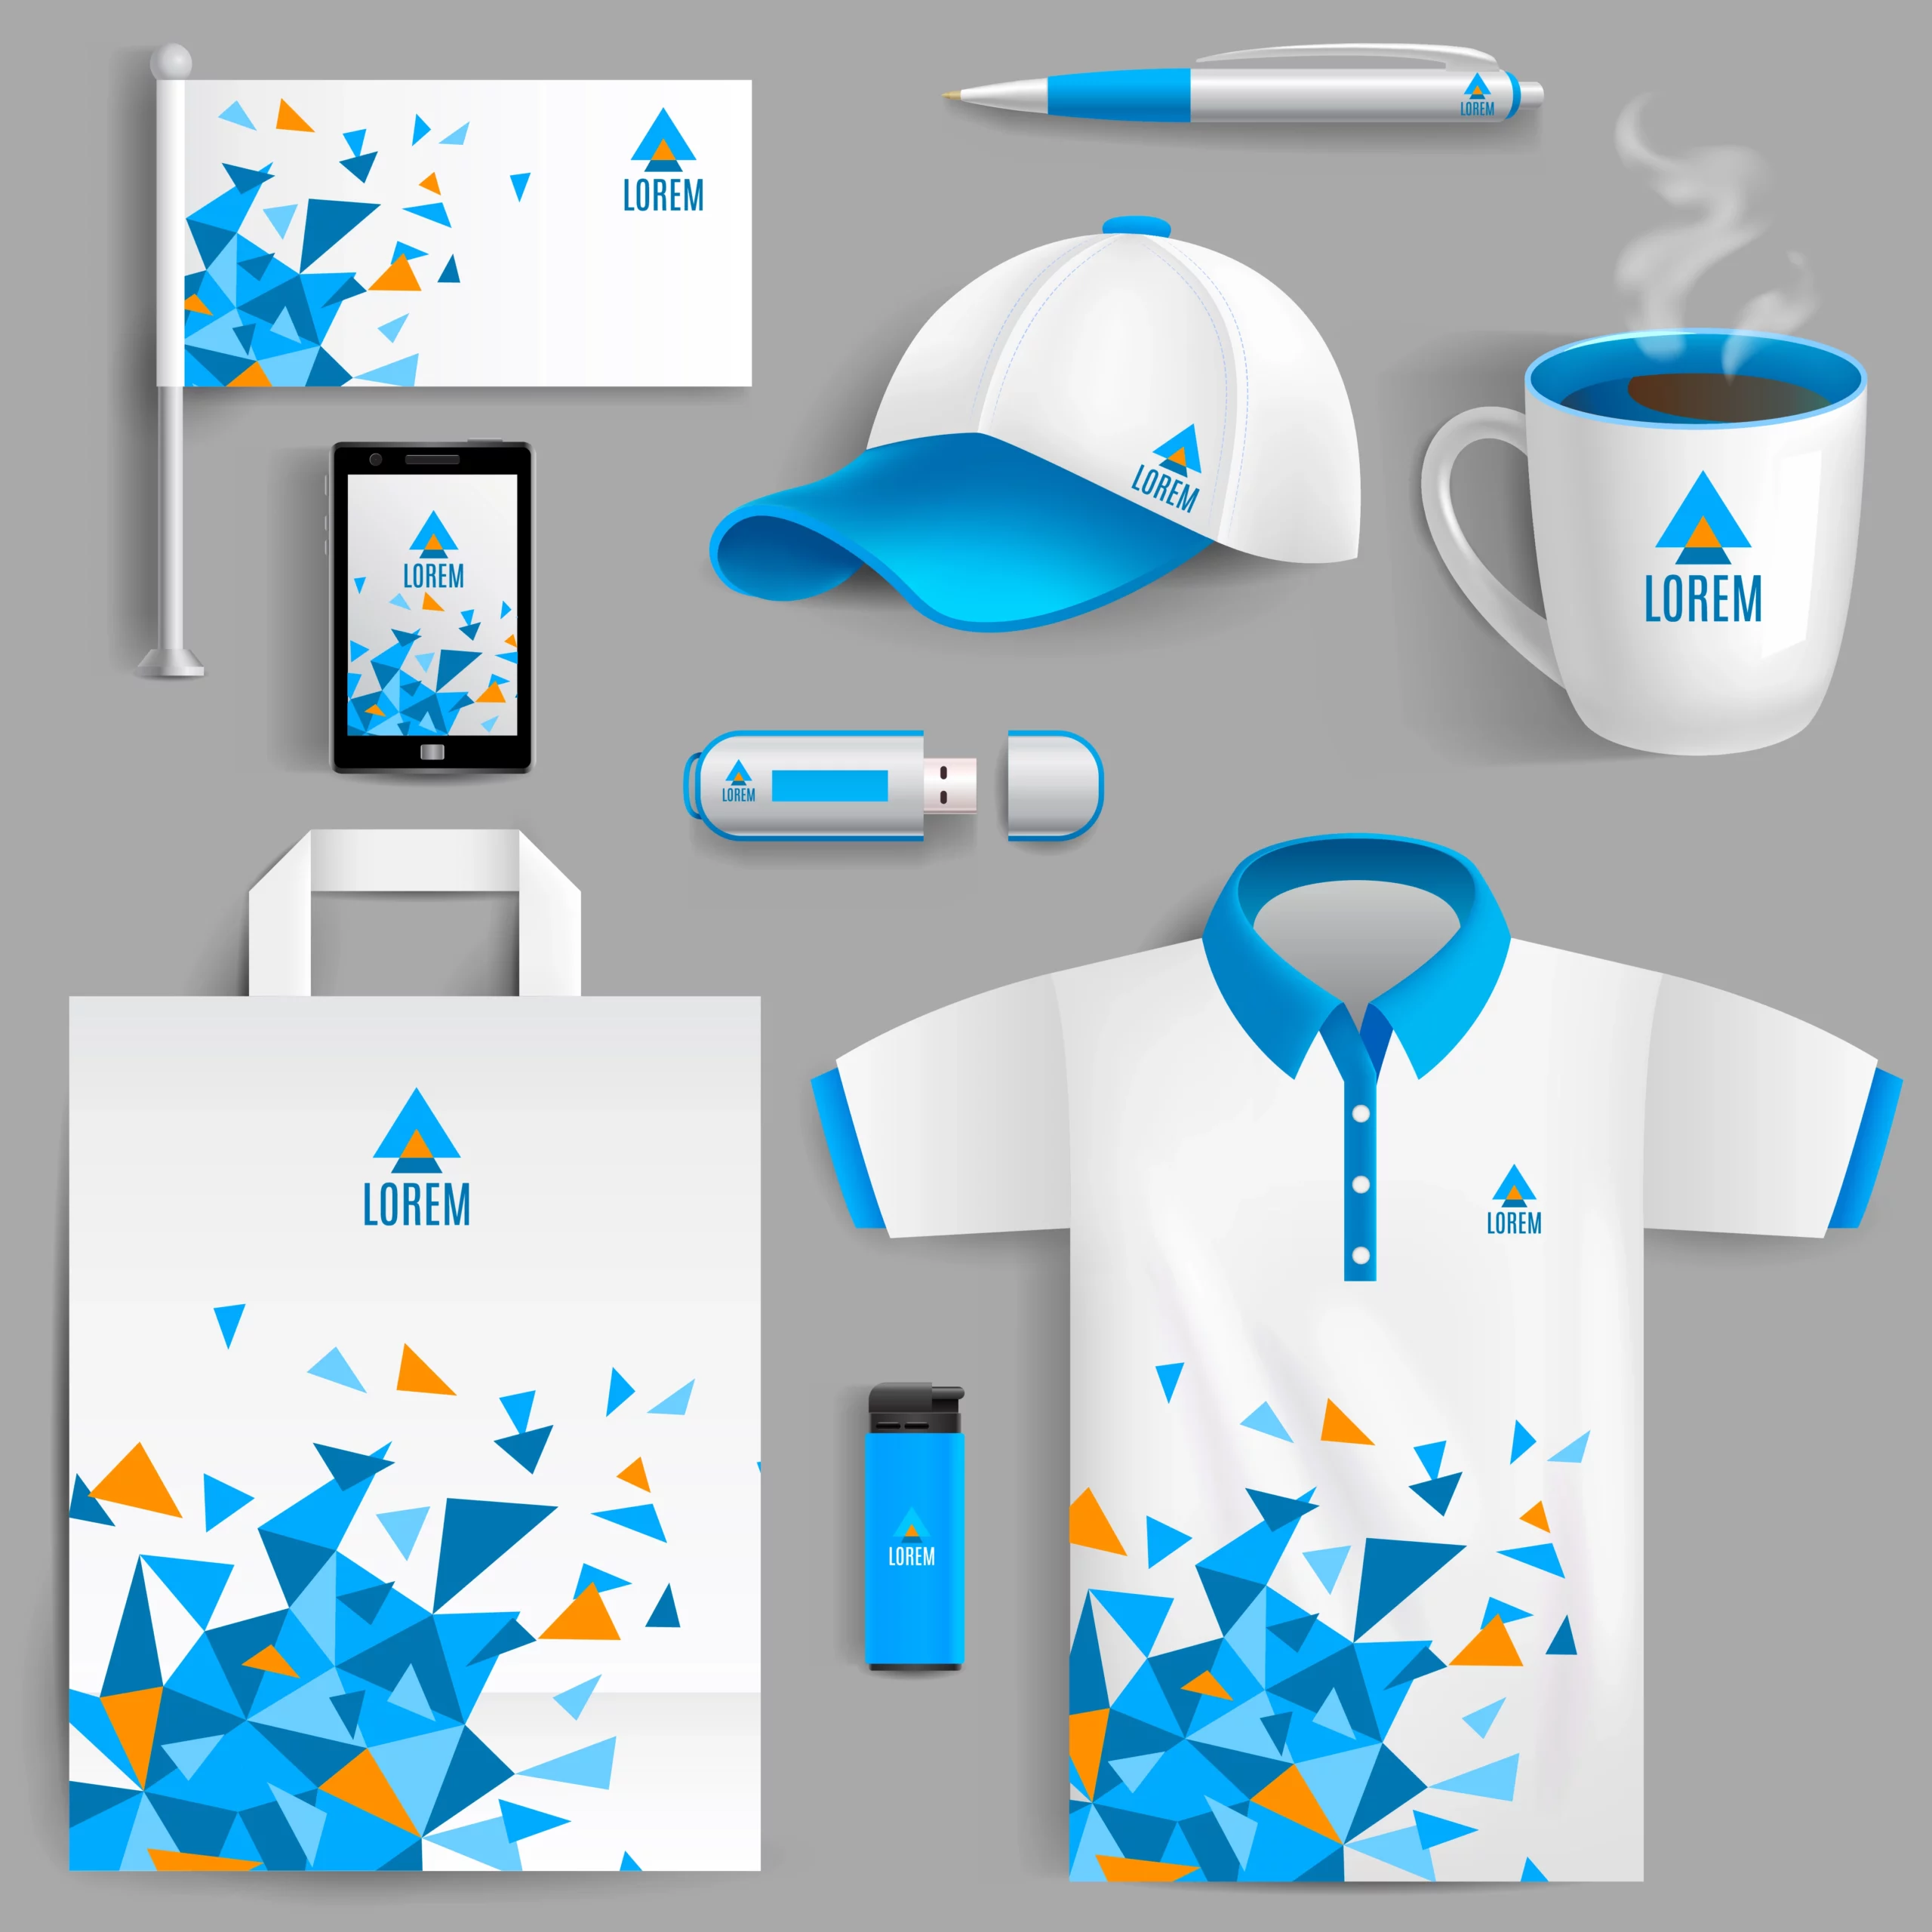 Pin on promotional gifts and products